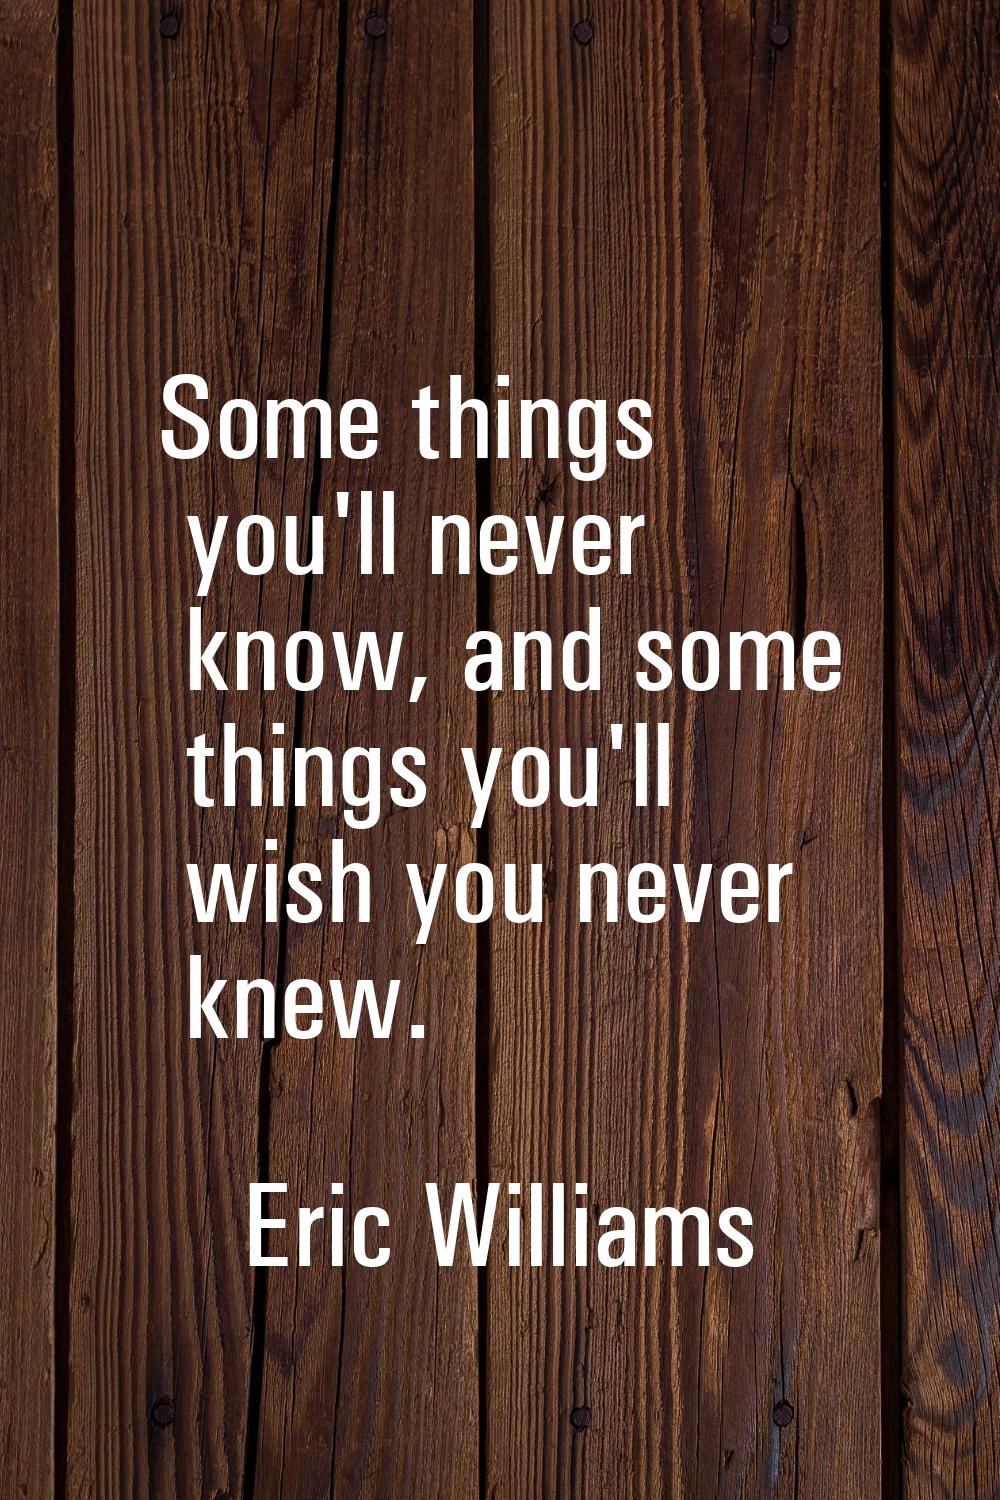 Some things you'll never know, and some things you'll wish you never knew.